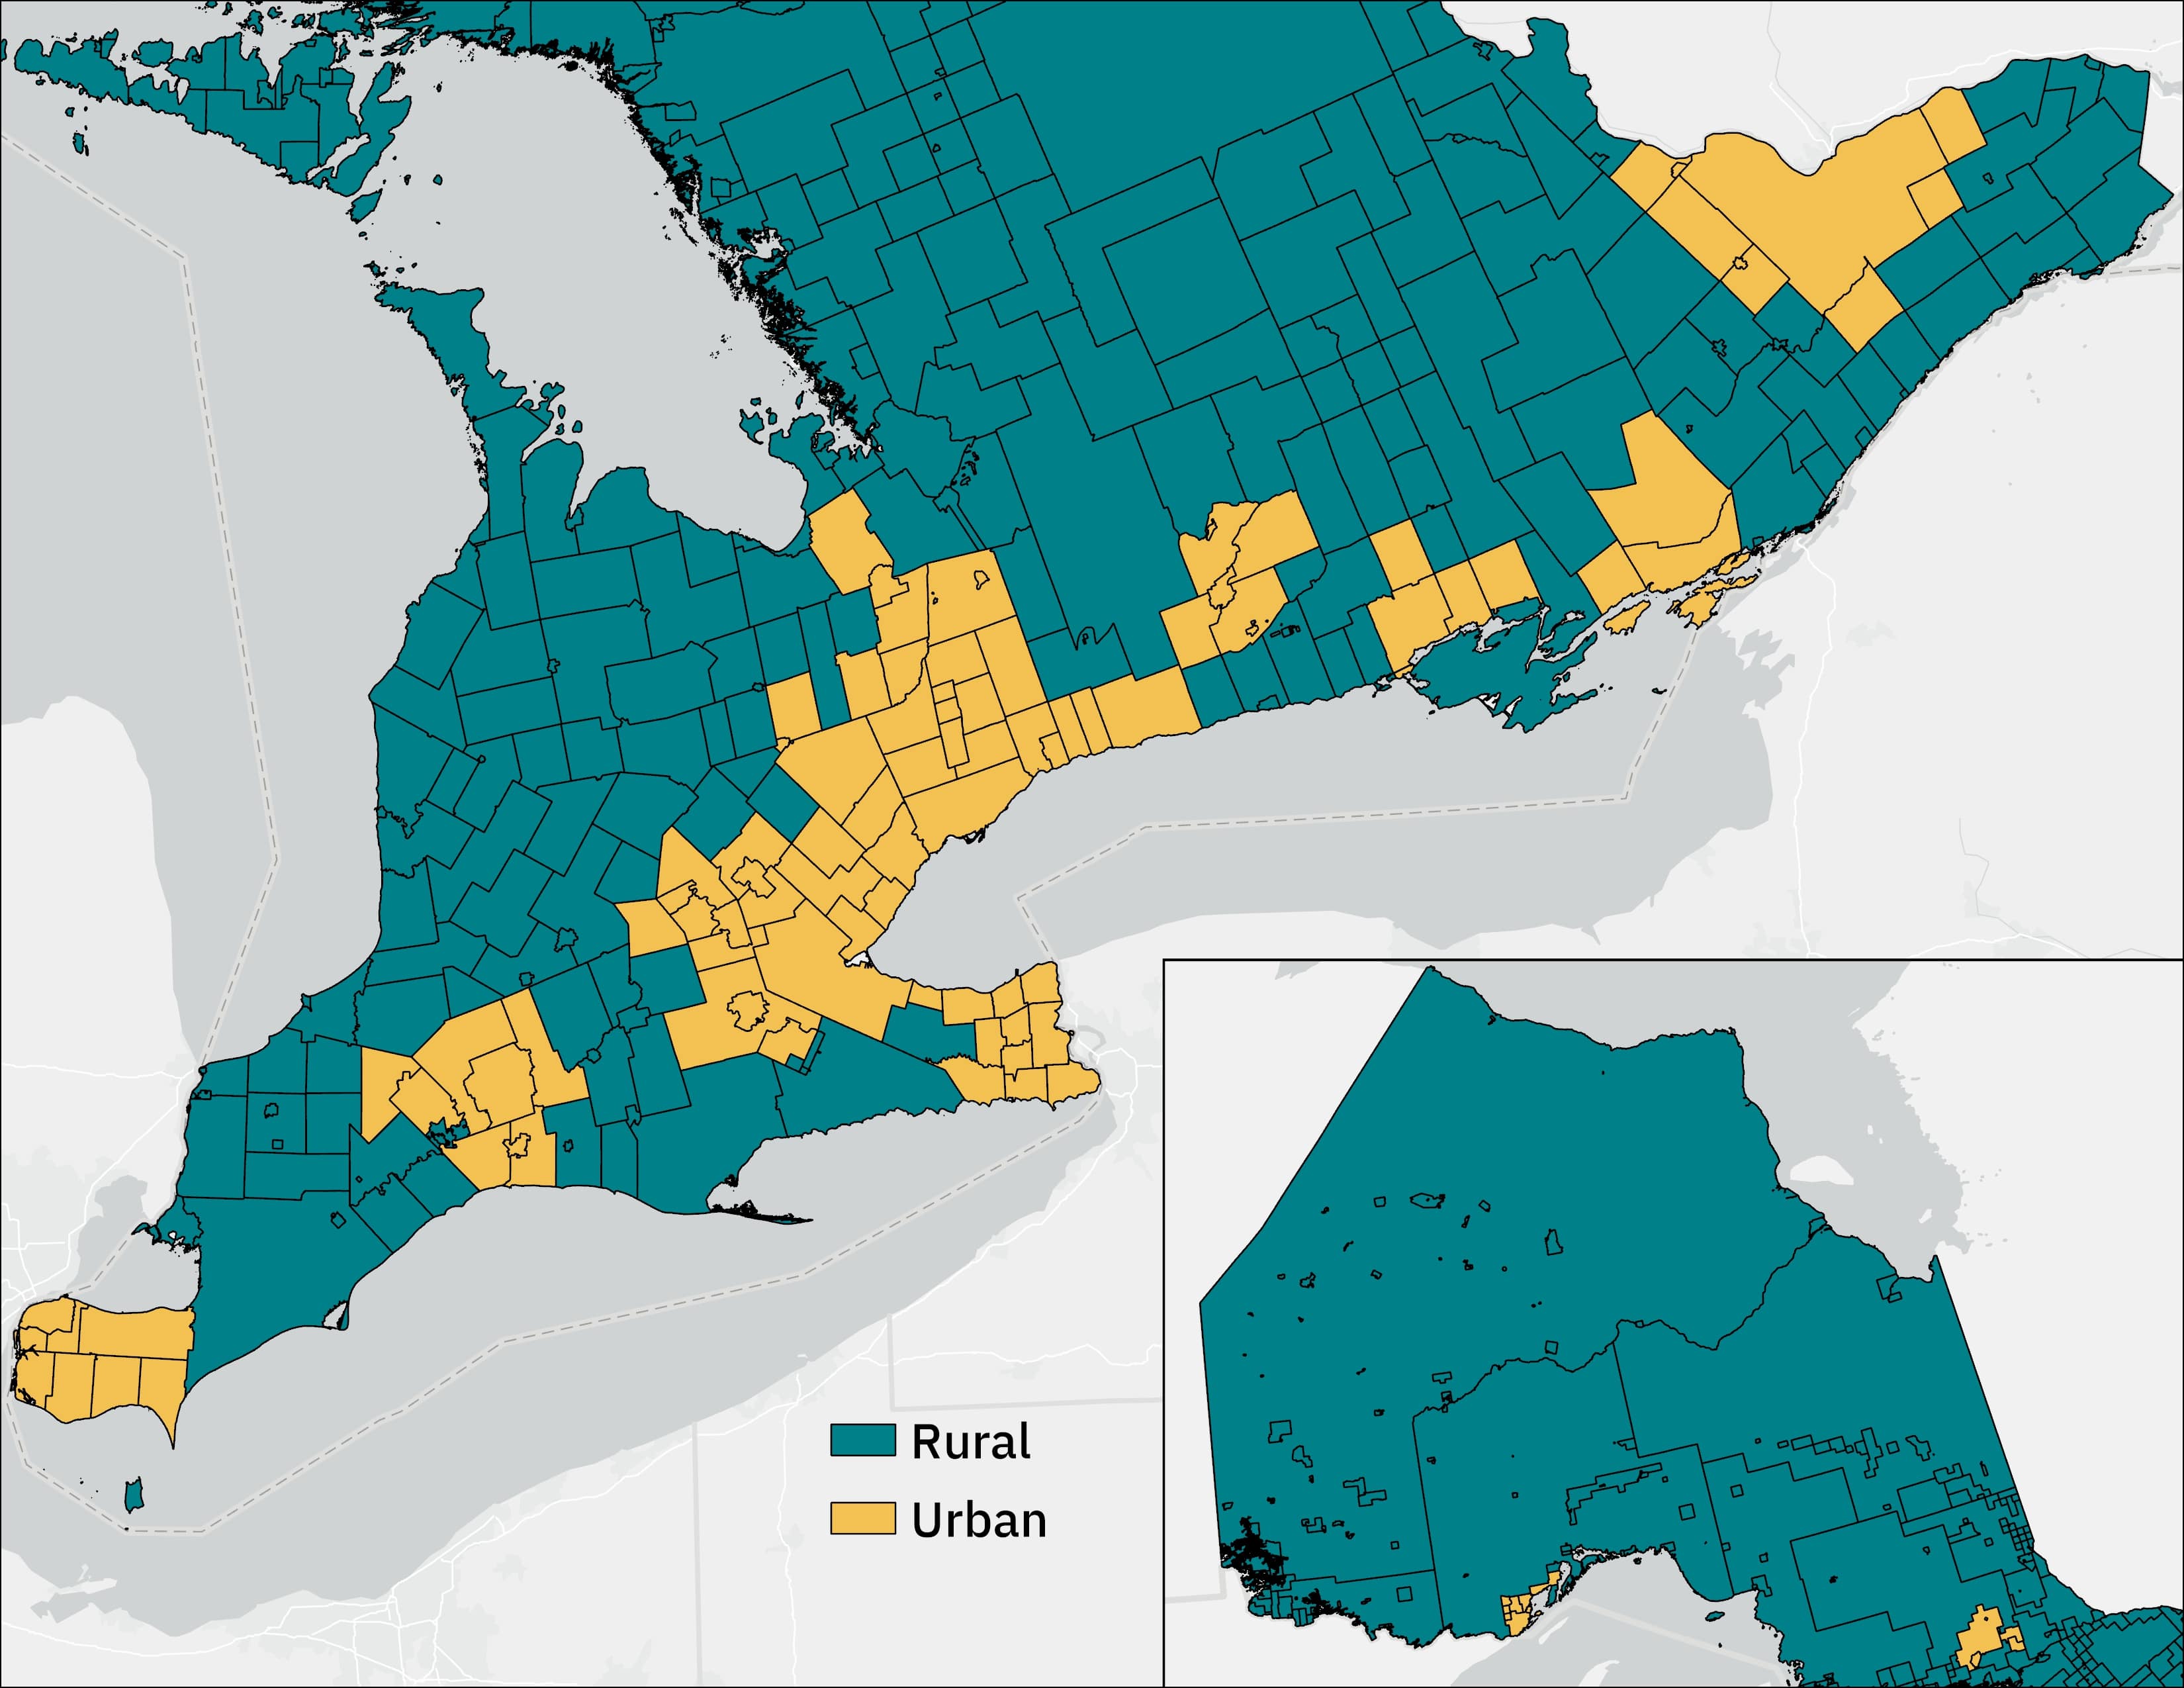 This map of Ontario shows the areas rural and urban Ontario using the definition based on census metropolitan areas (urban areas) and non-census metropolitan (rural areas) using the 2021 geographical boundaries.